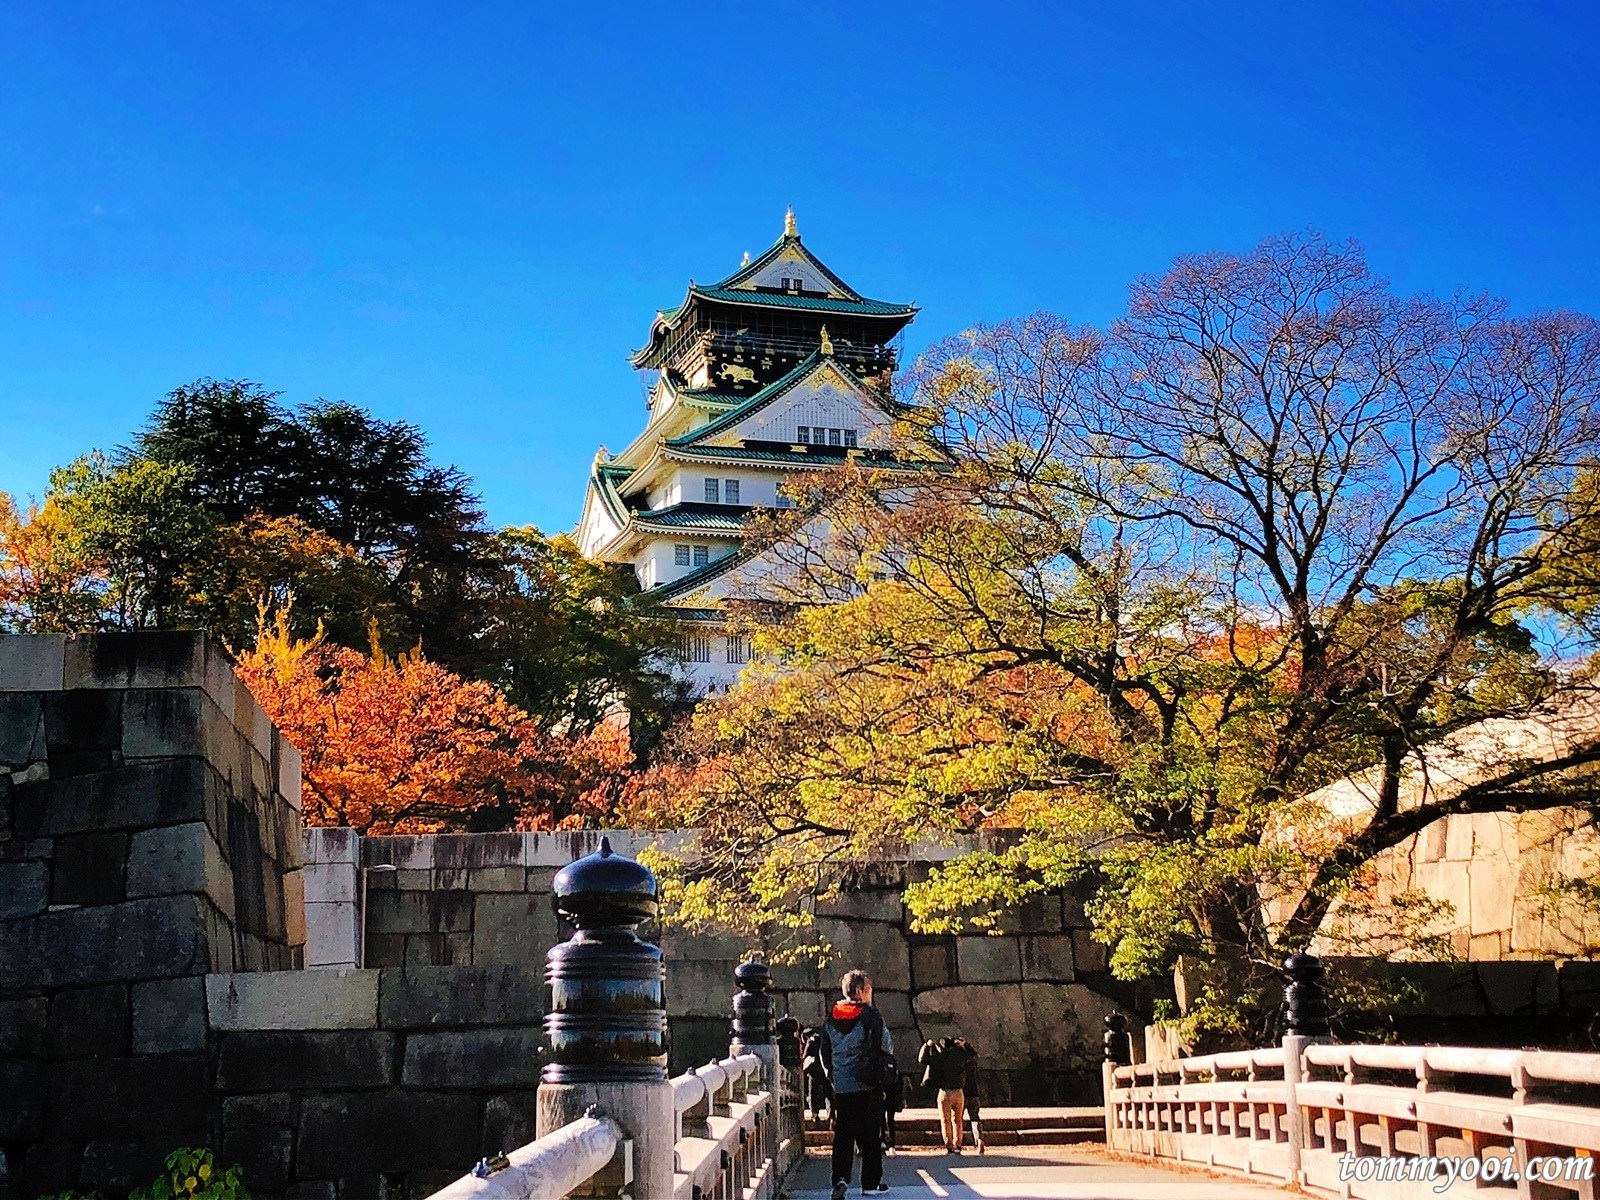 The ideal Japan honeymoon itinerary for 8 nights